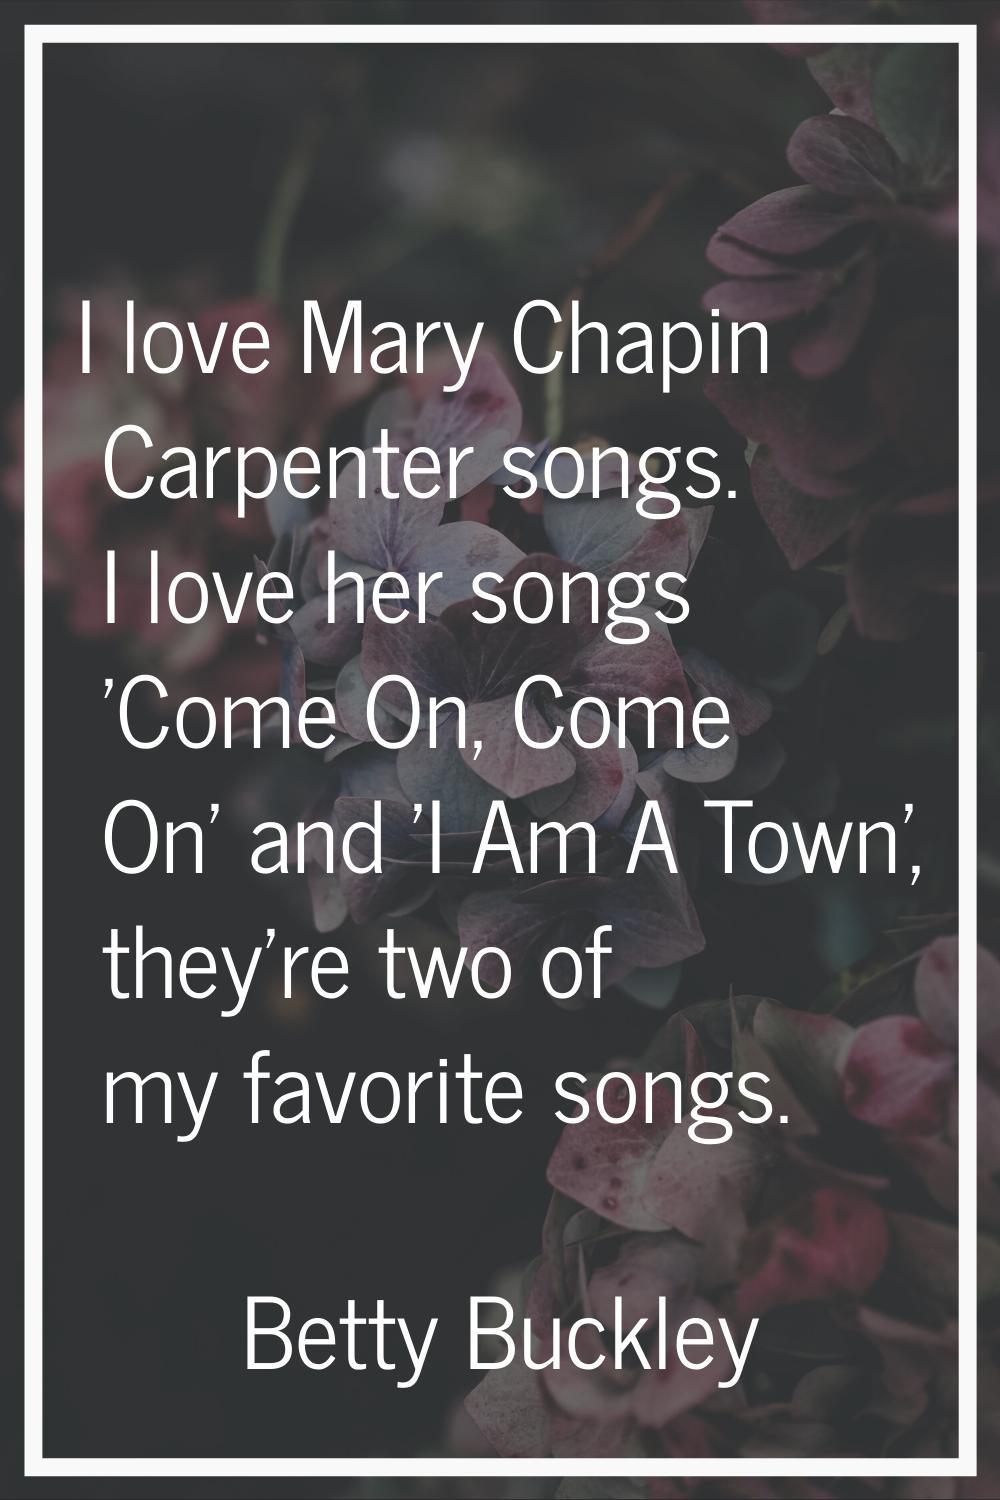 I love Mary Chapin Carpenter songs. I love her songs 'Come On, Come On' and 'I Am A Town', they're 